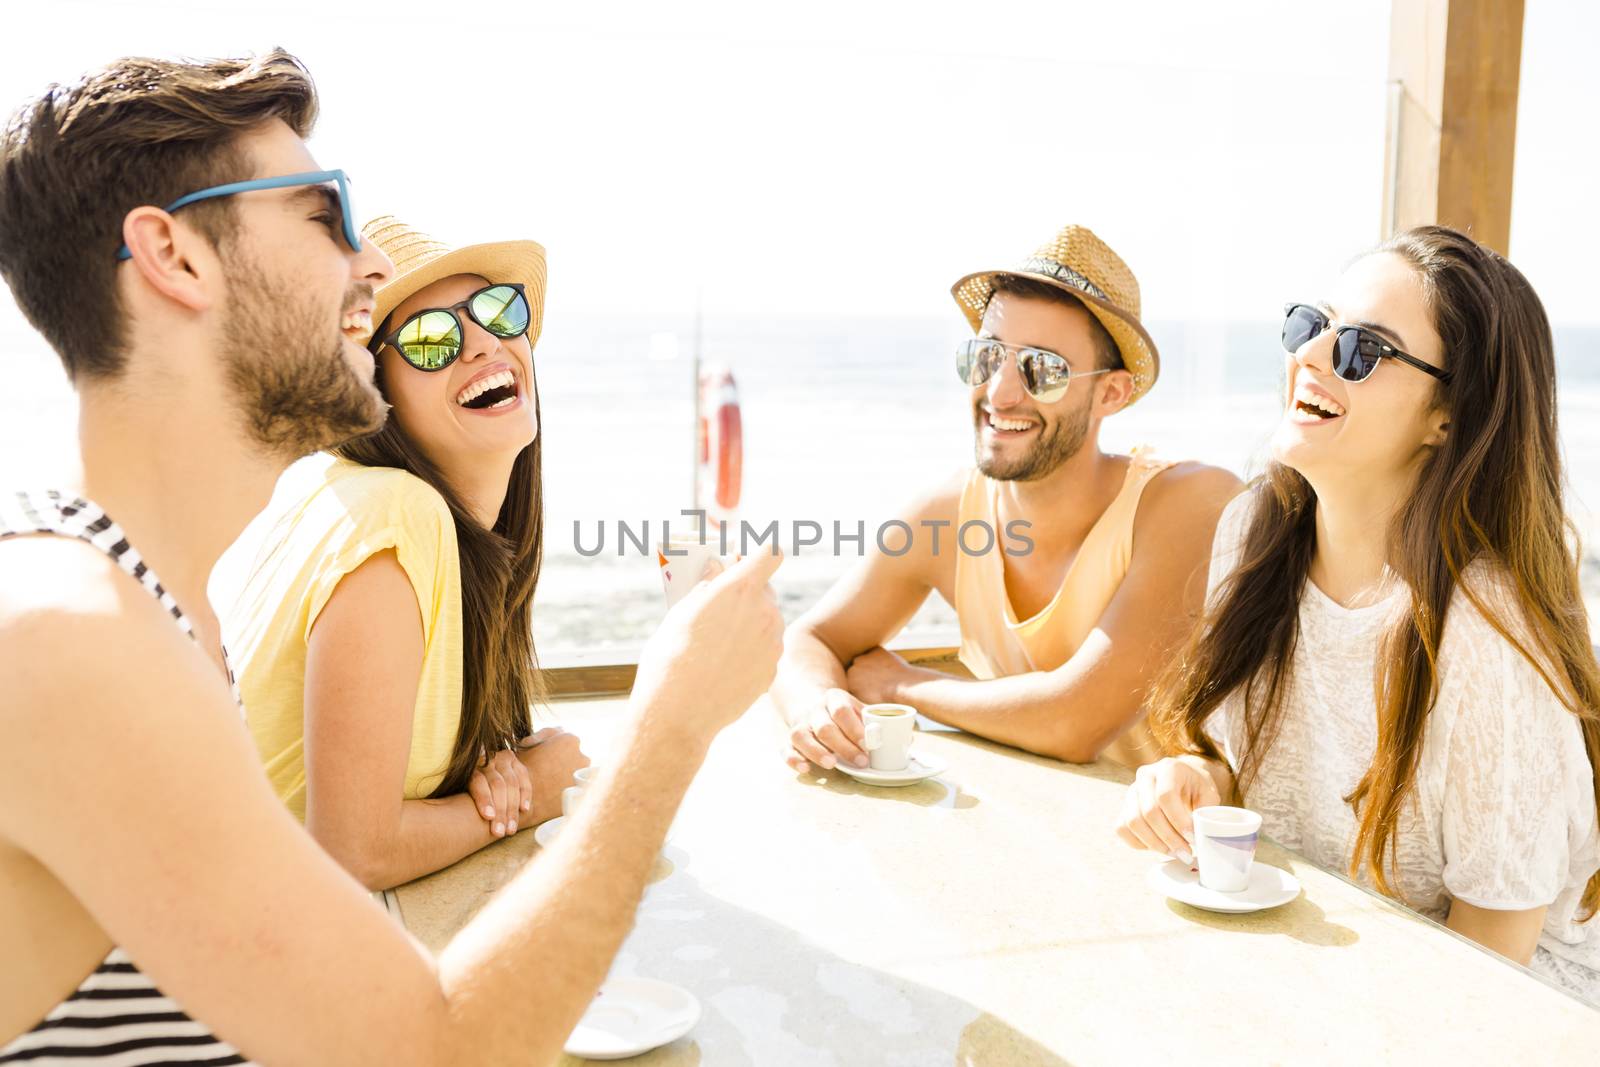 Fiends having a great time together at the beach bar